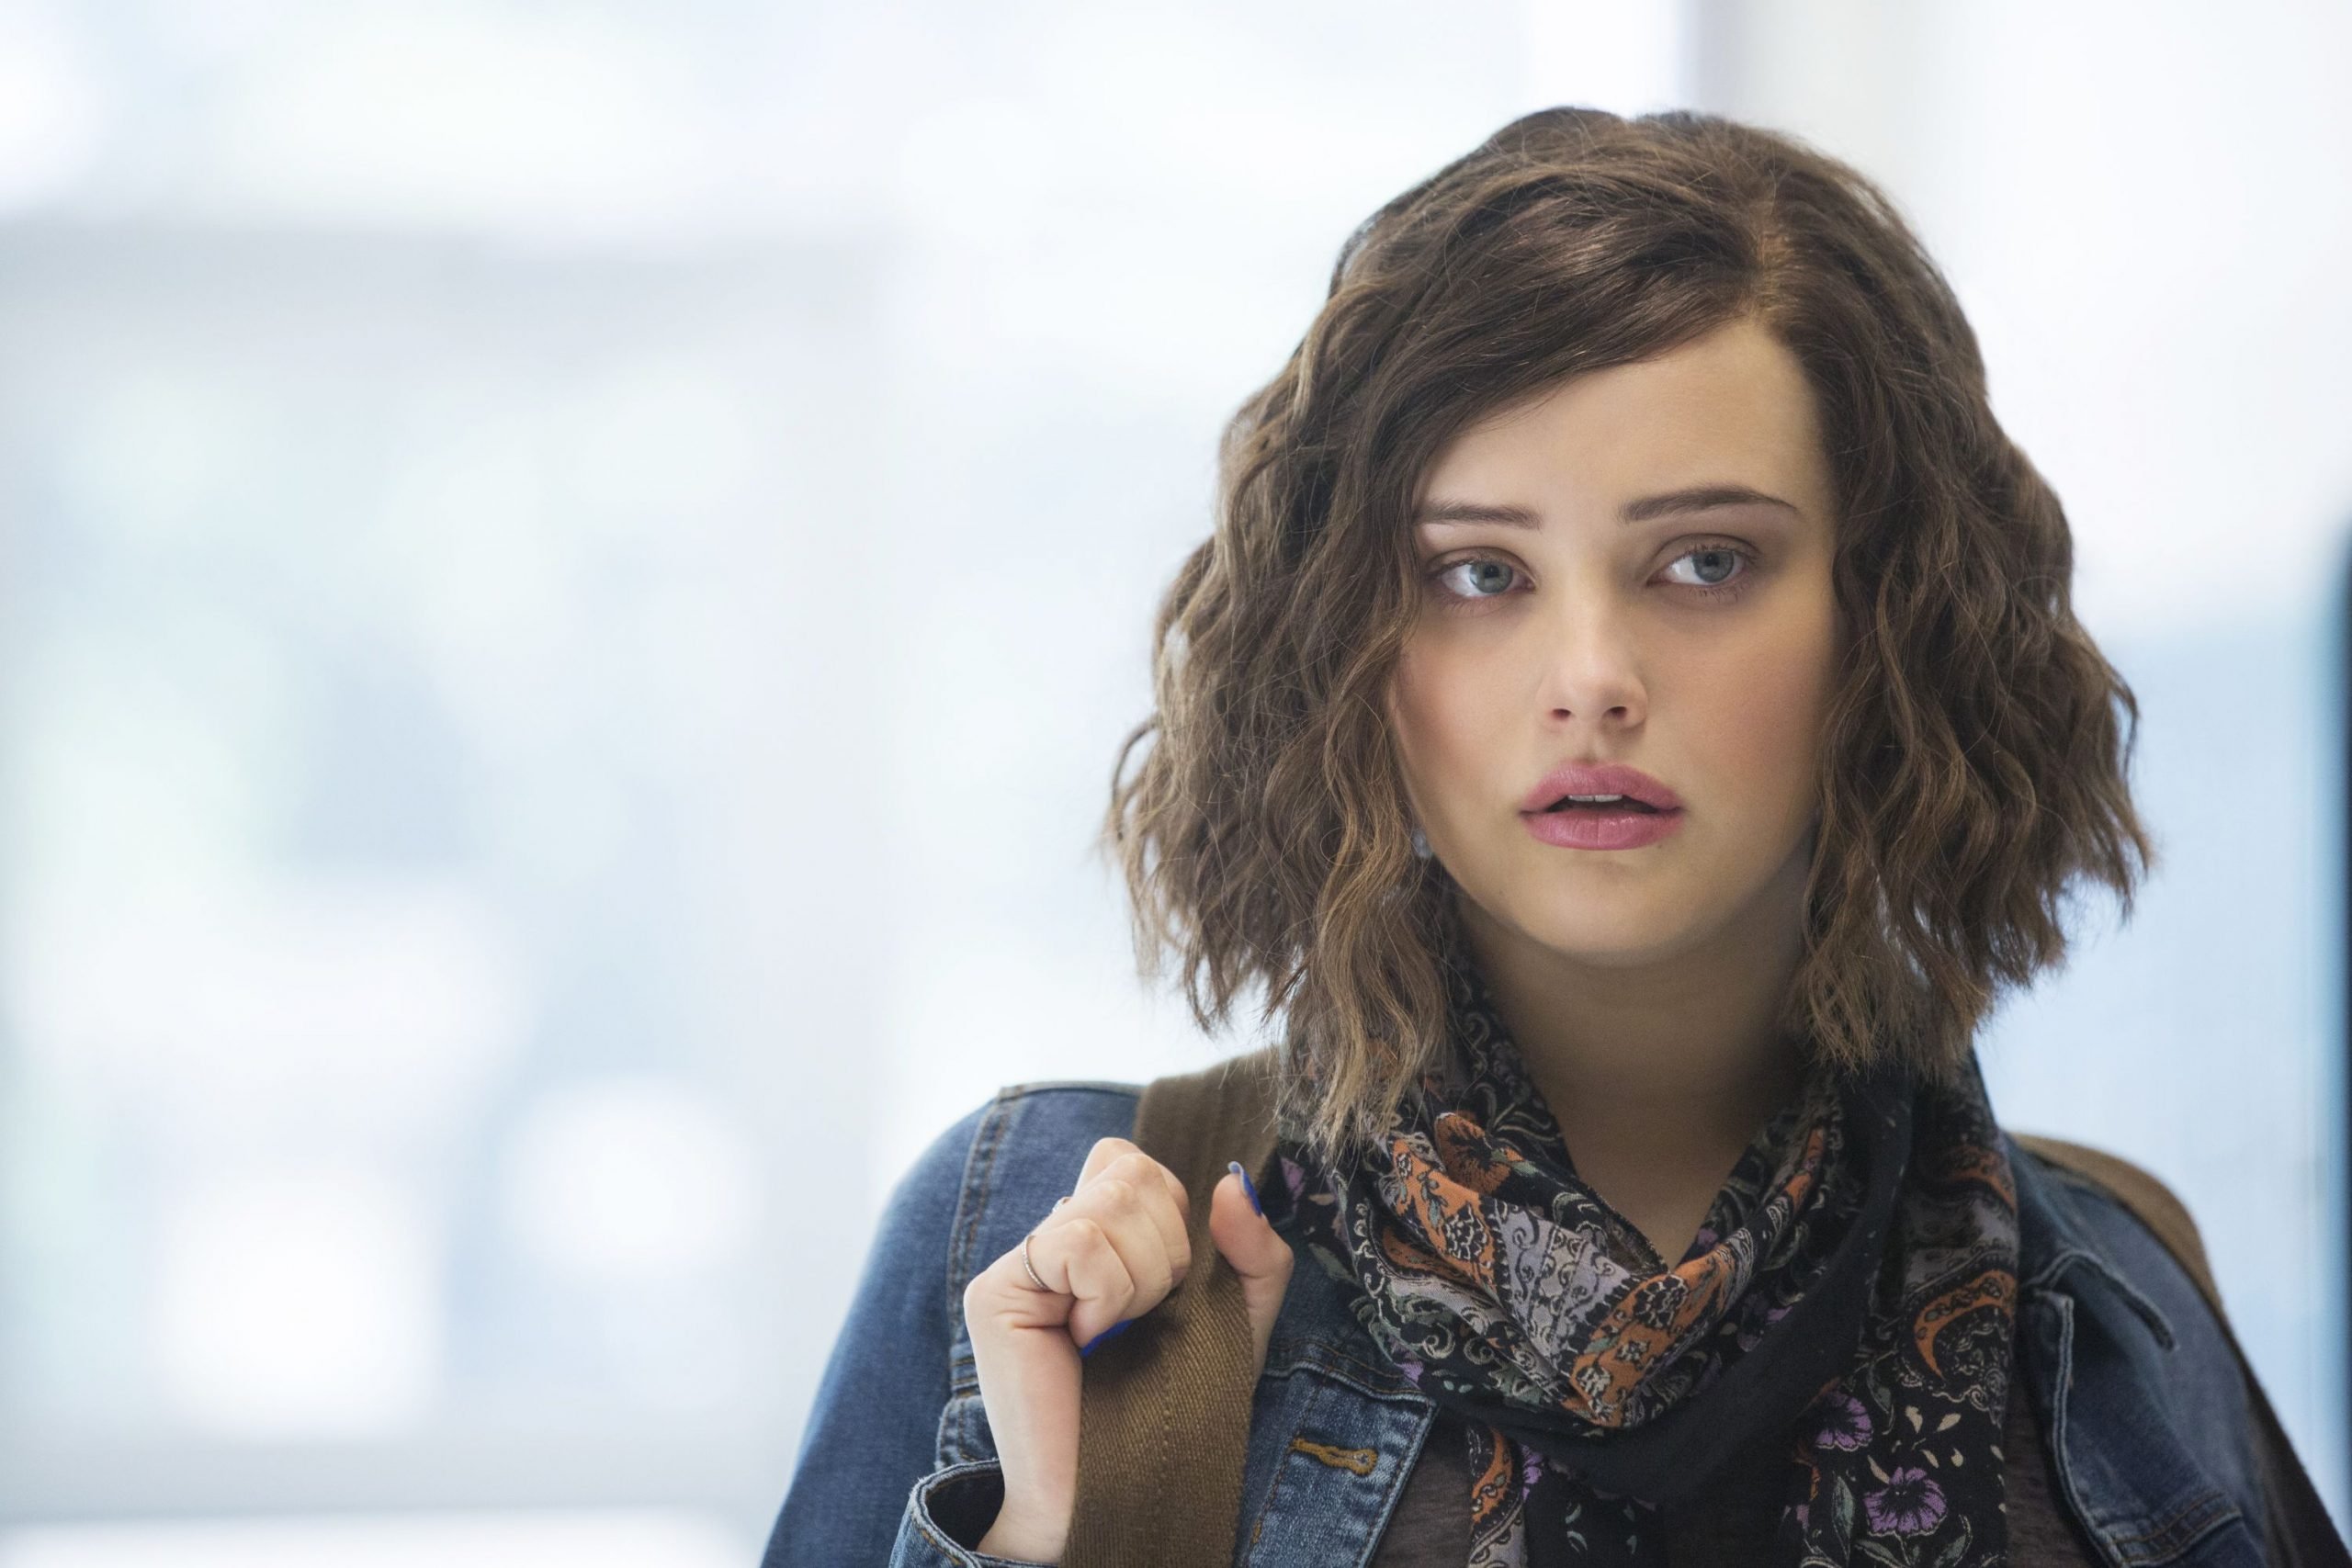 ’13 Reasons Why’ is not for people with mental health issues - spunout